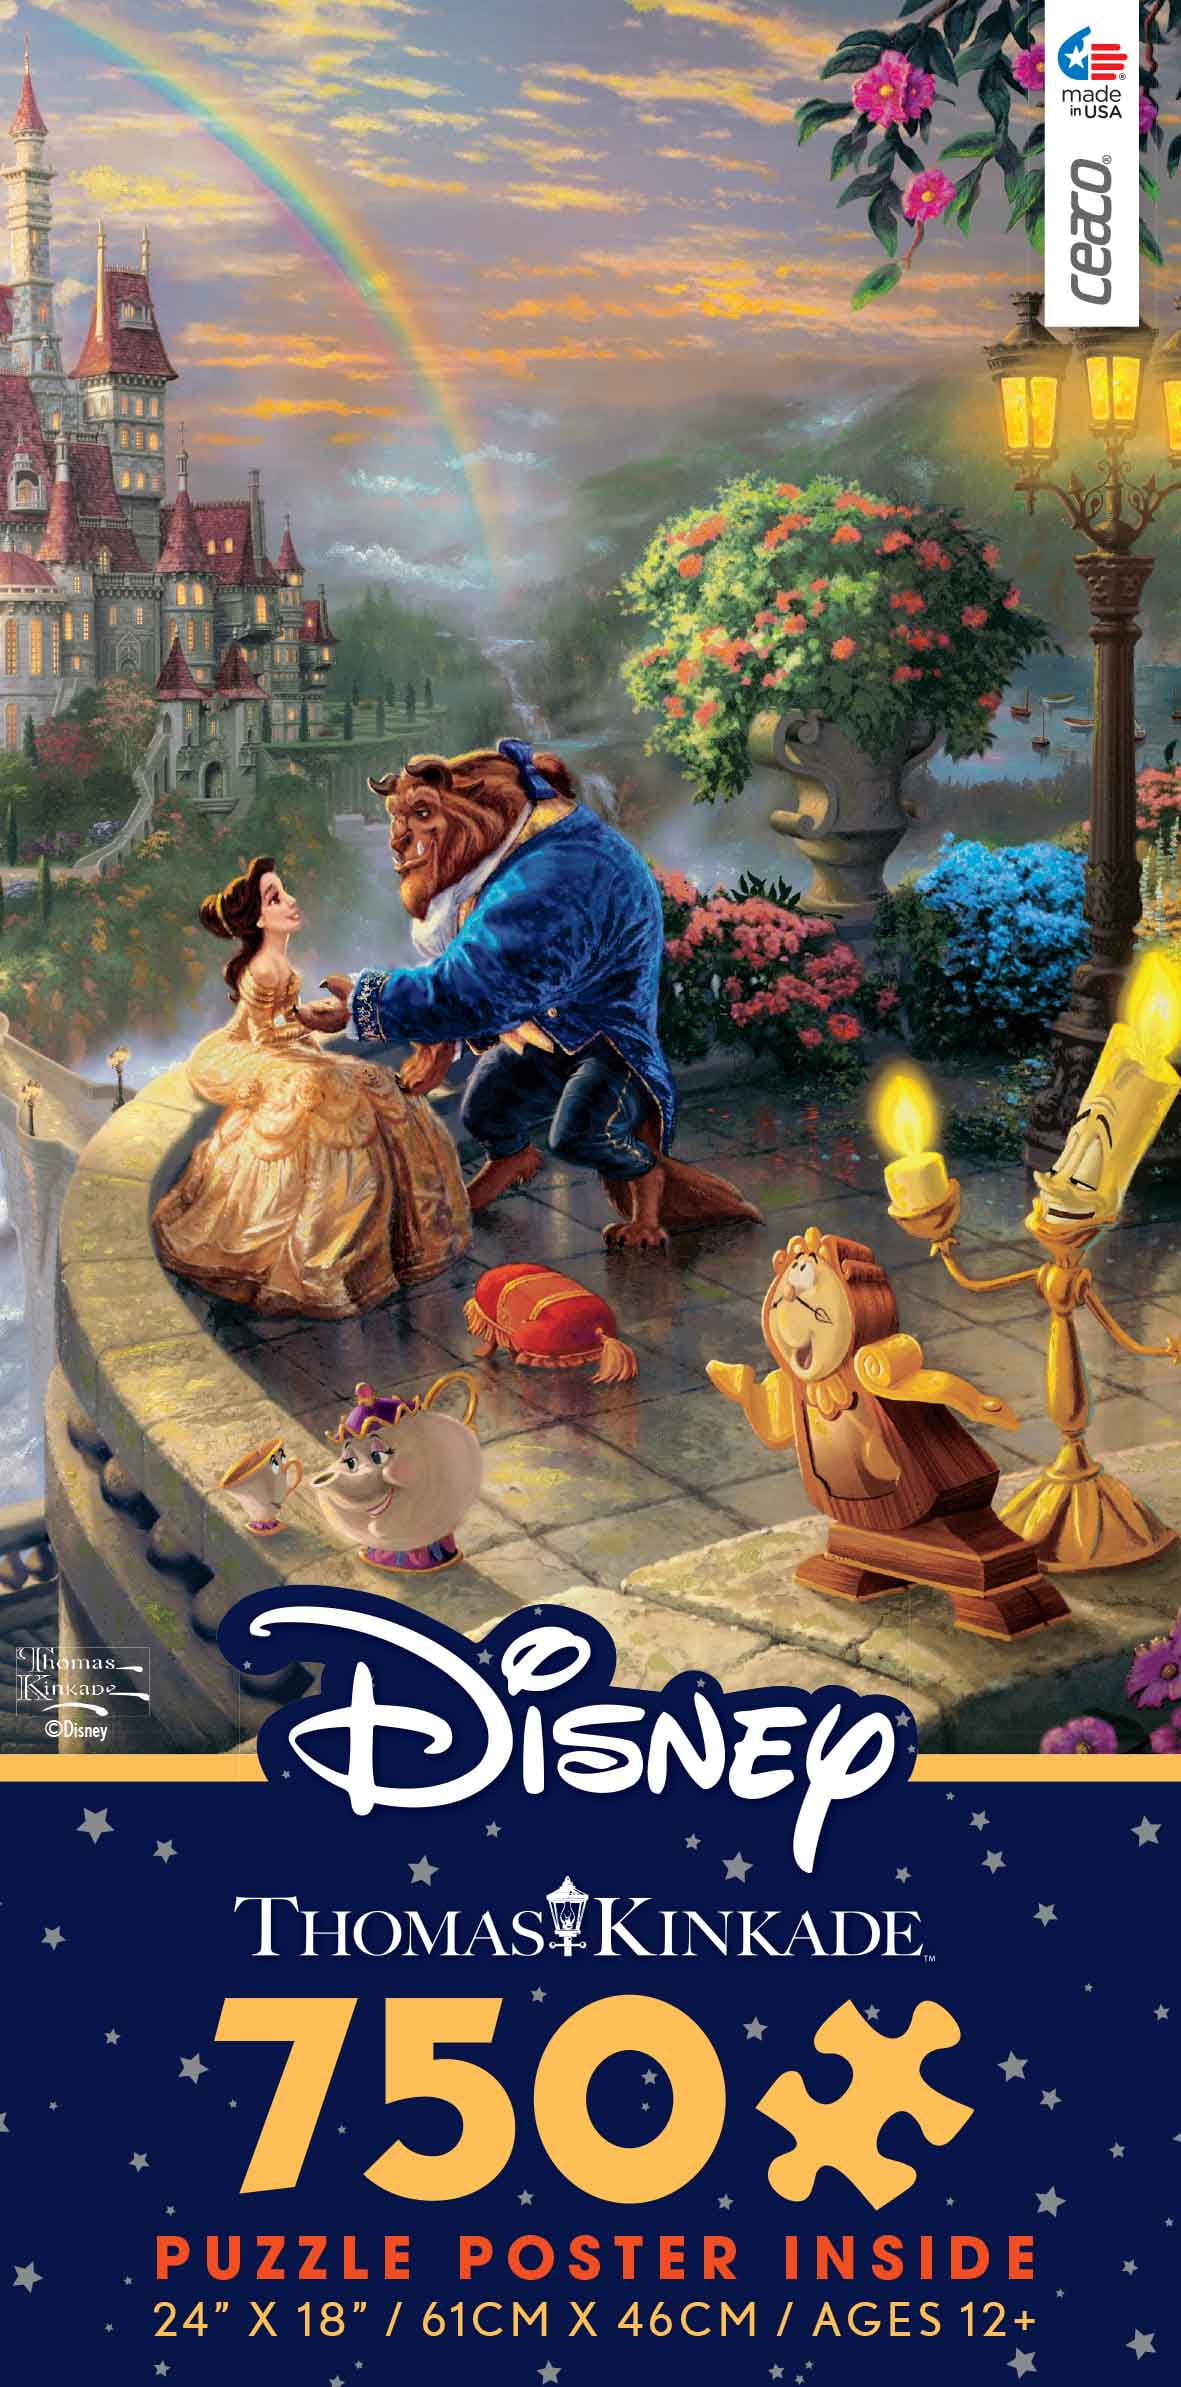 Disney Beauty and the Beast Signature Belle & Beast 1000 Piece Jigsaw Puzzle 